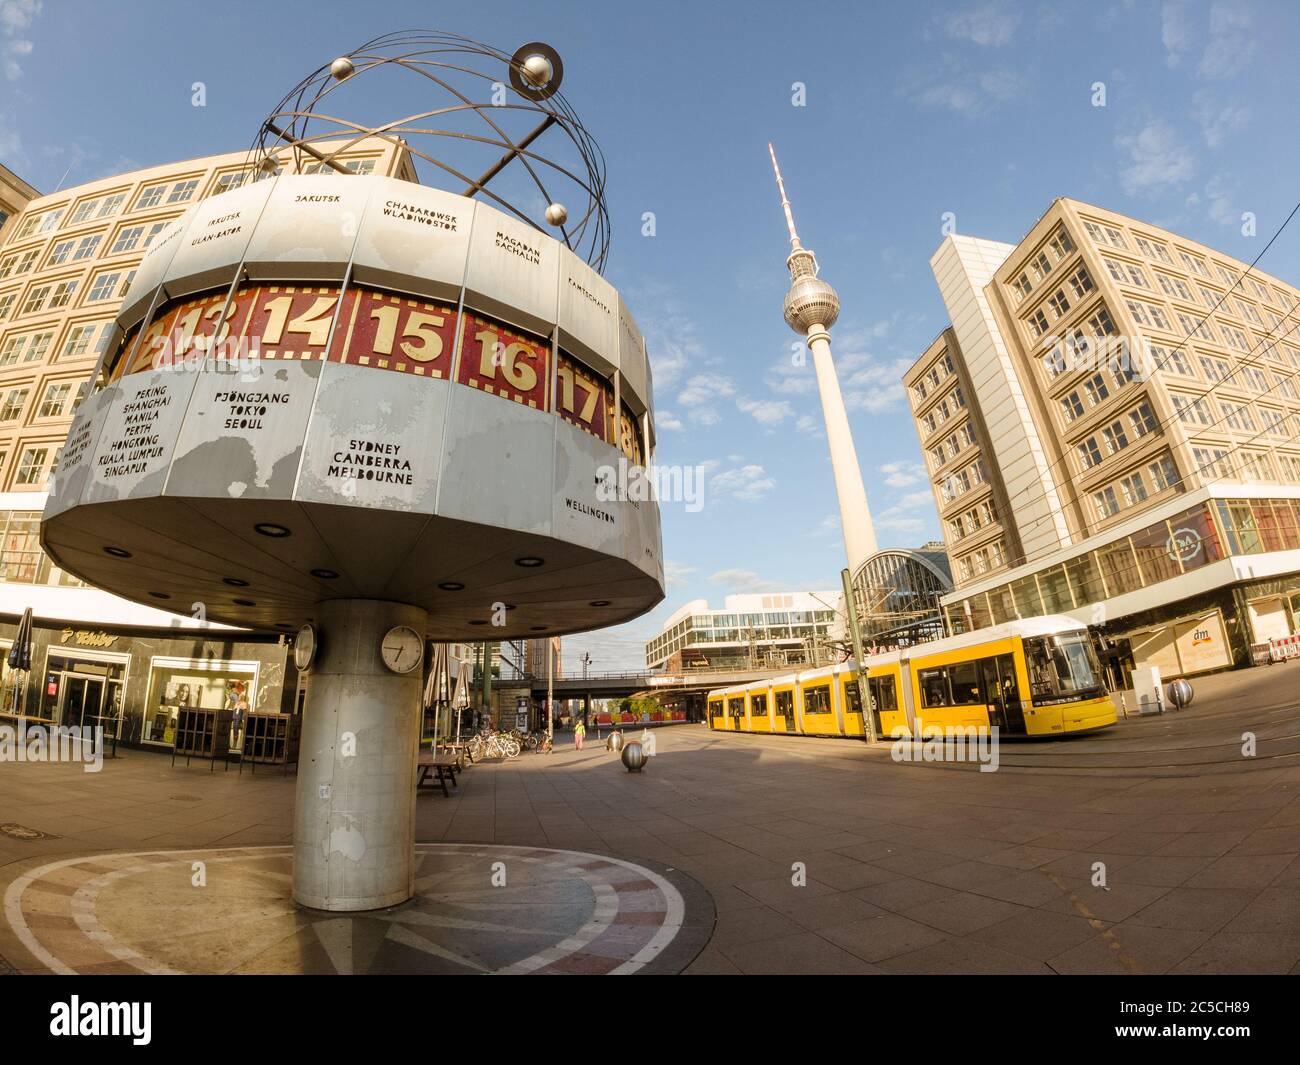 Berlin, Germany - June 15, 2020 - View of the famous world clock on Alexanderplatz in Berlin with the Berlin TV tower in the background Stock Photo